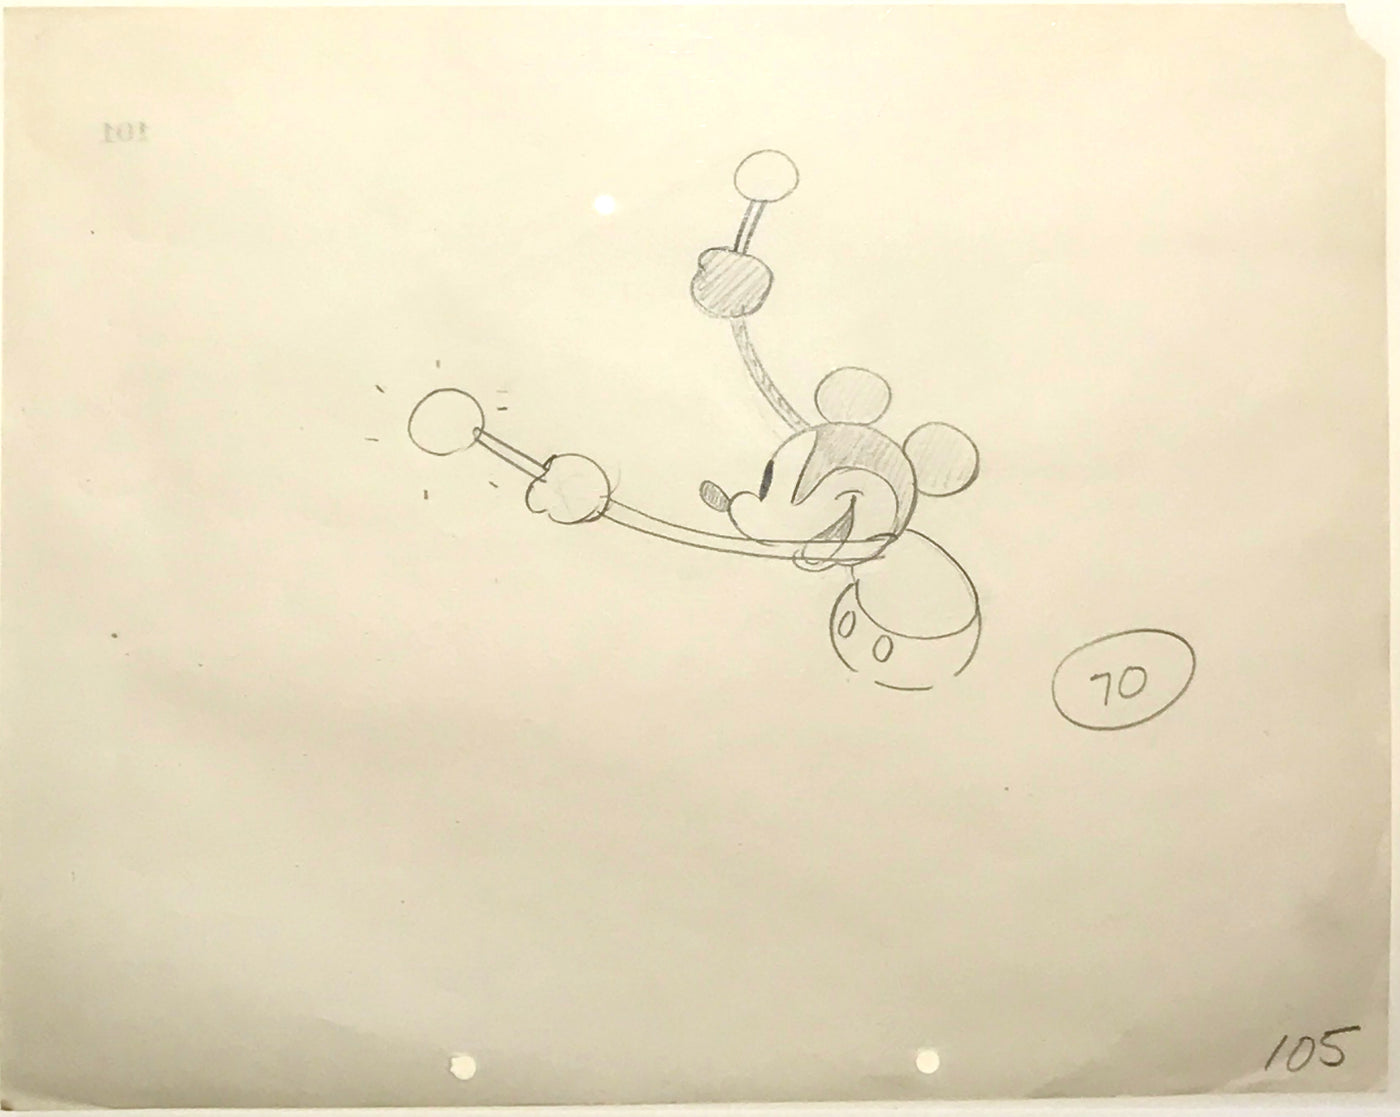 Original Walt Disney Production Drawing from Steamboat Willie (1928) featuring Mickey Mouse